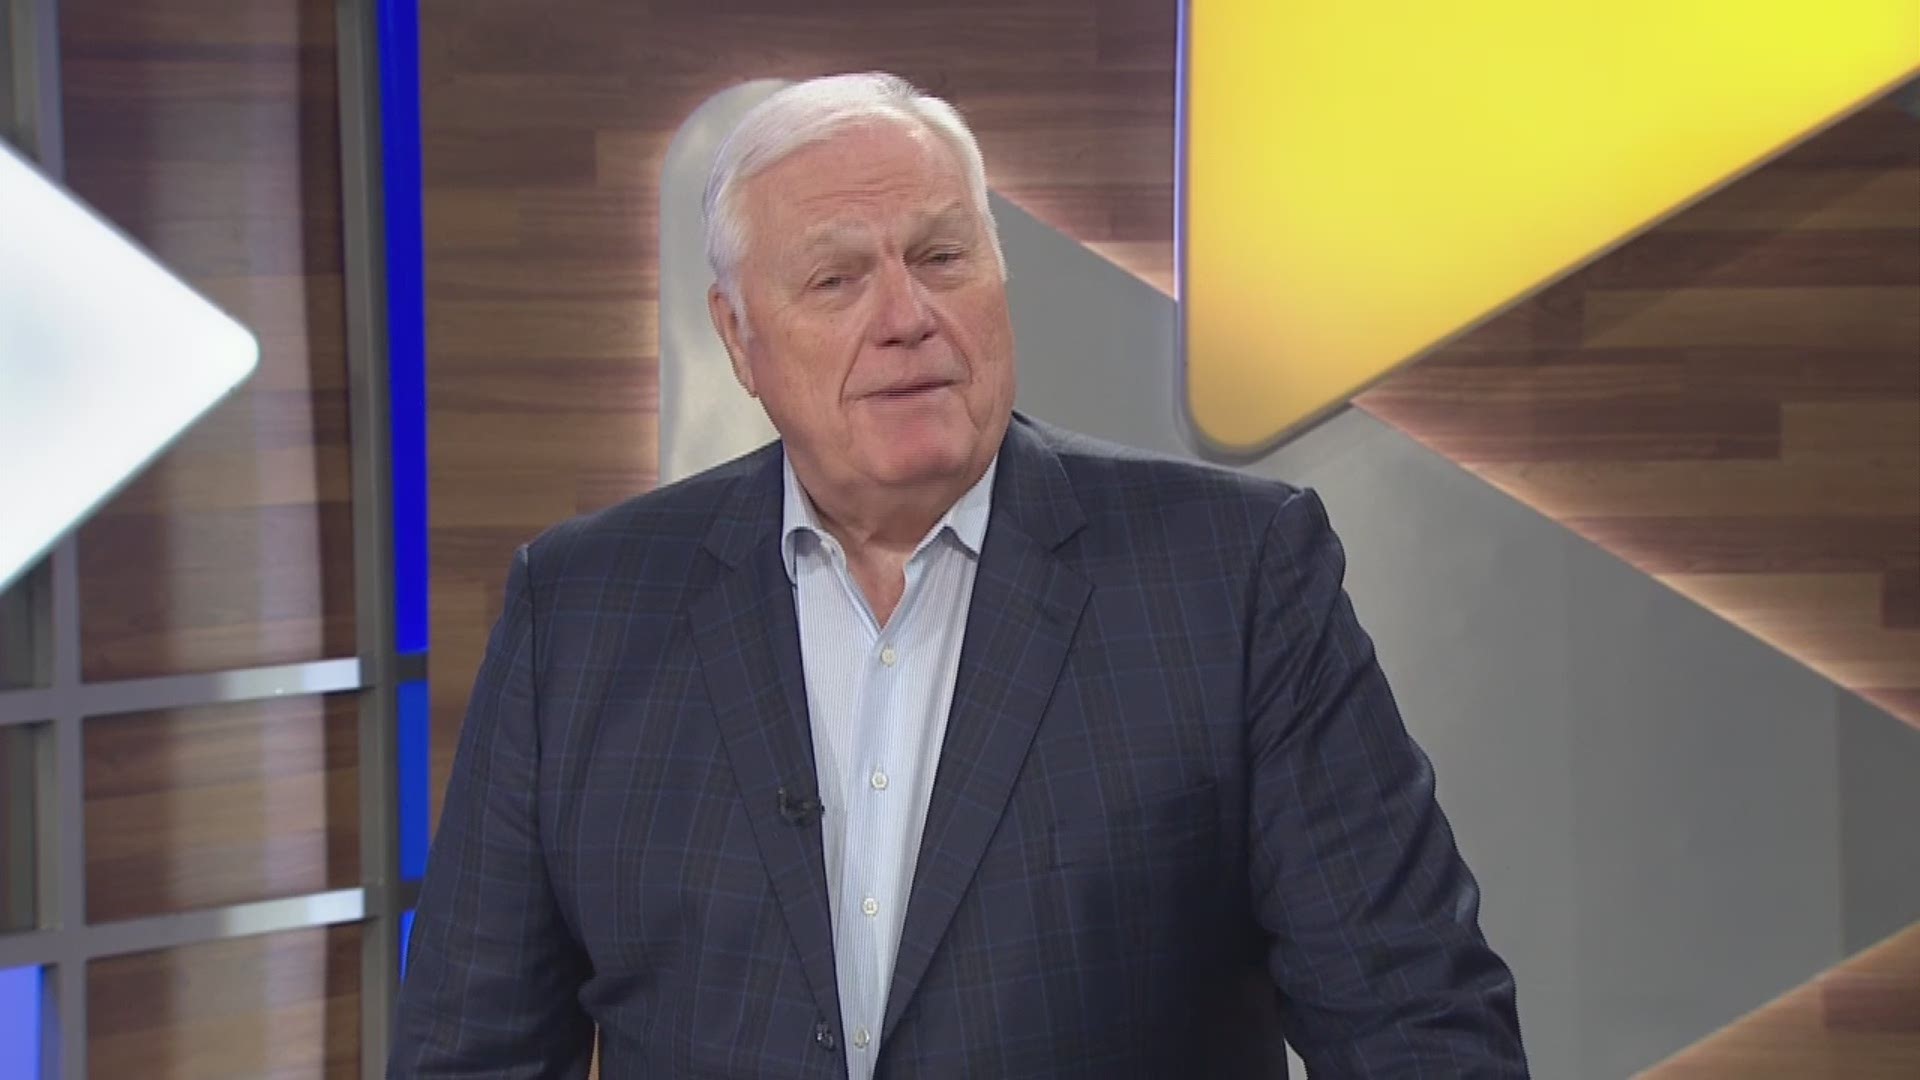 dale hansen unplugged today